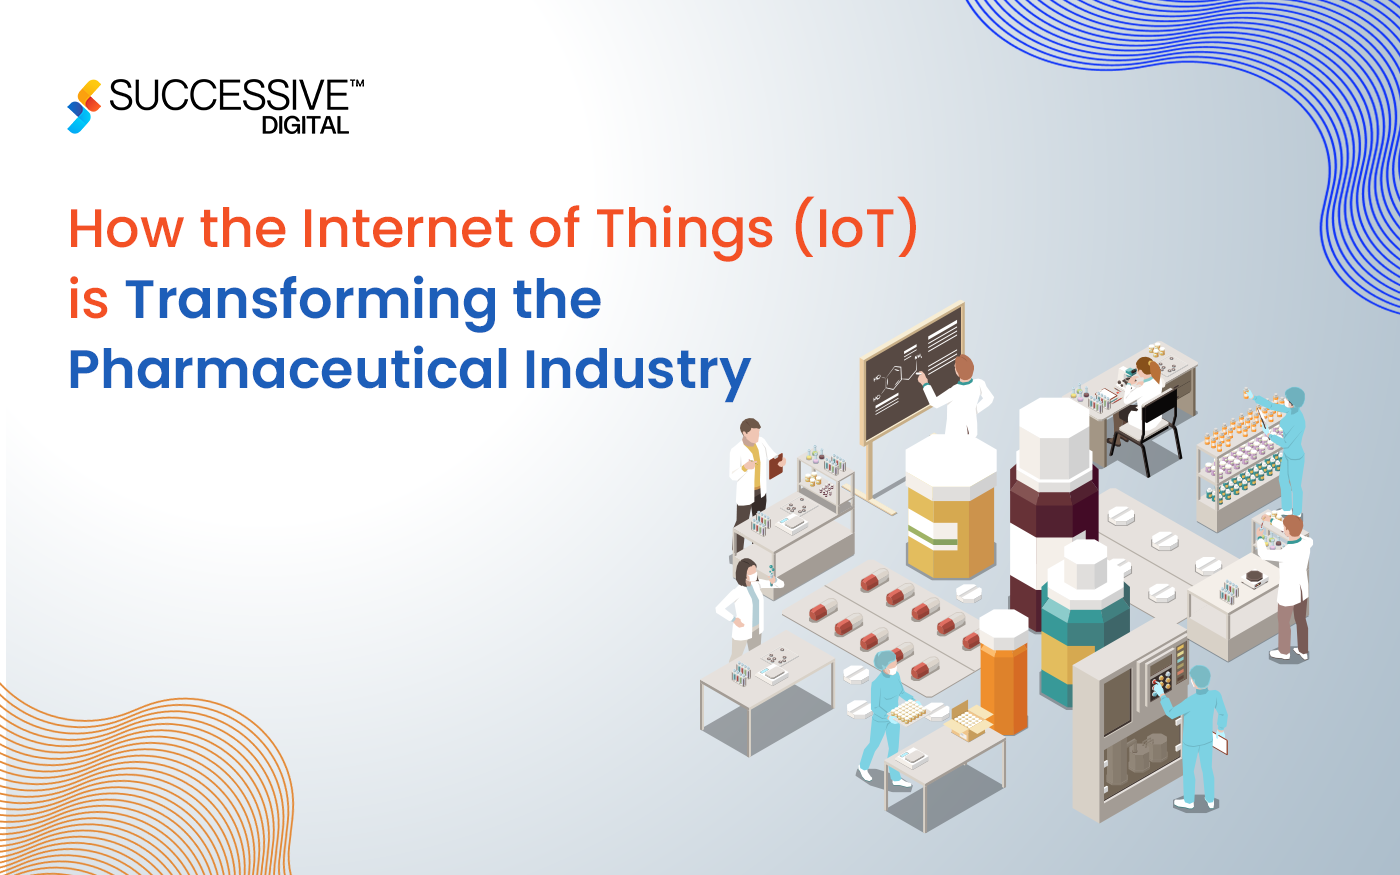 How is the Internet of Things (IoT) Transforming The Pharmaceutical Industry?